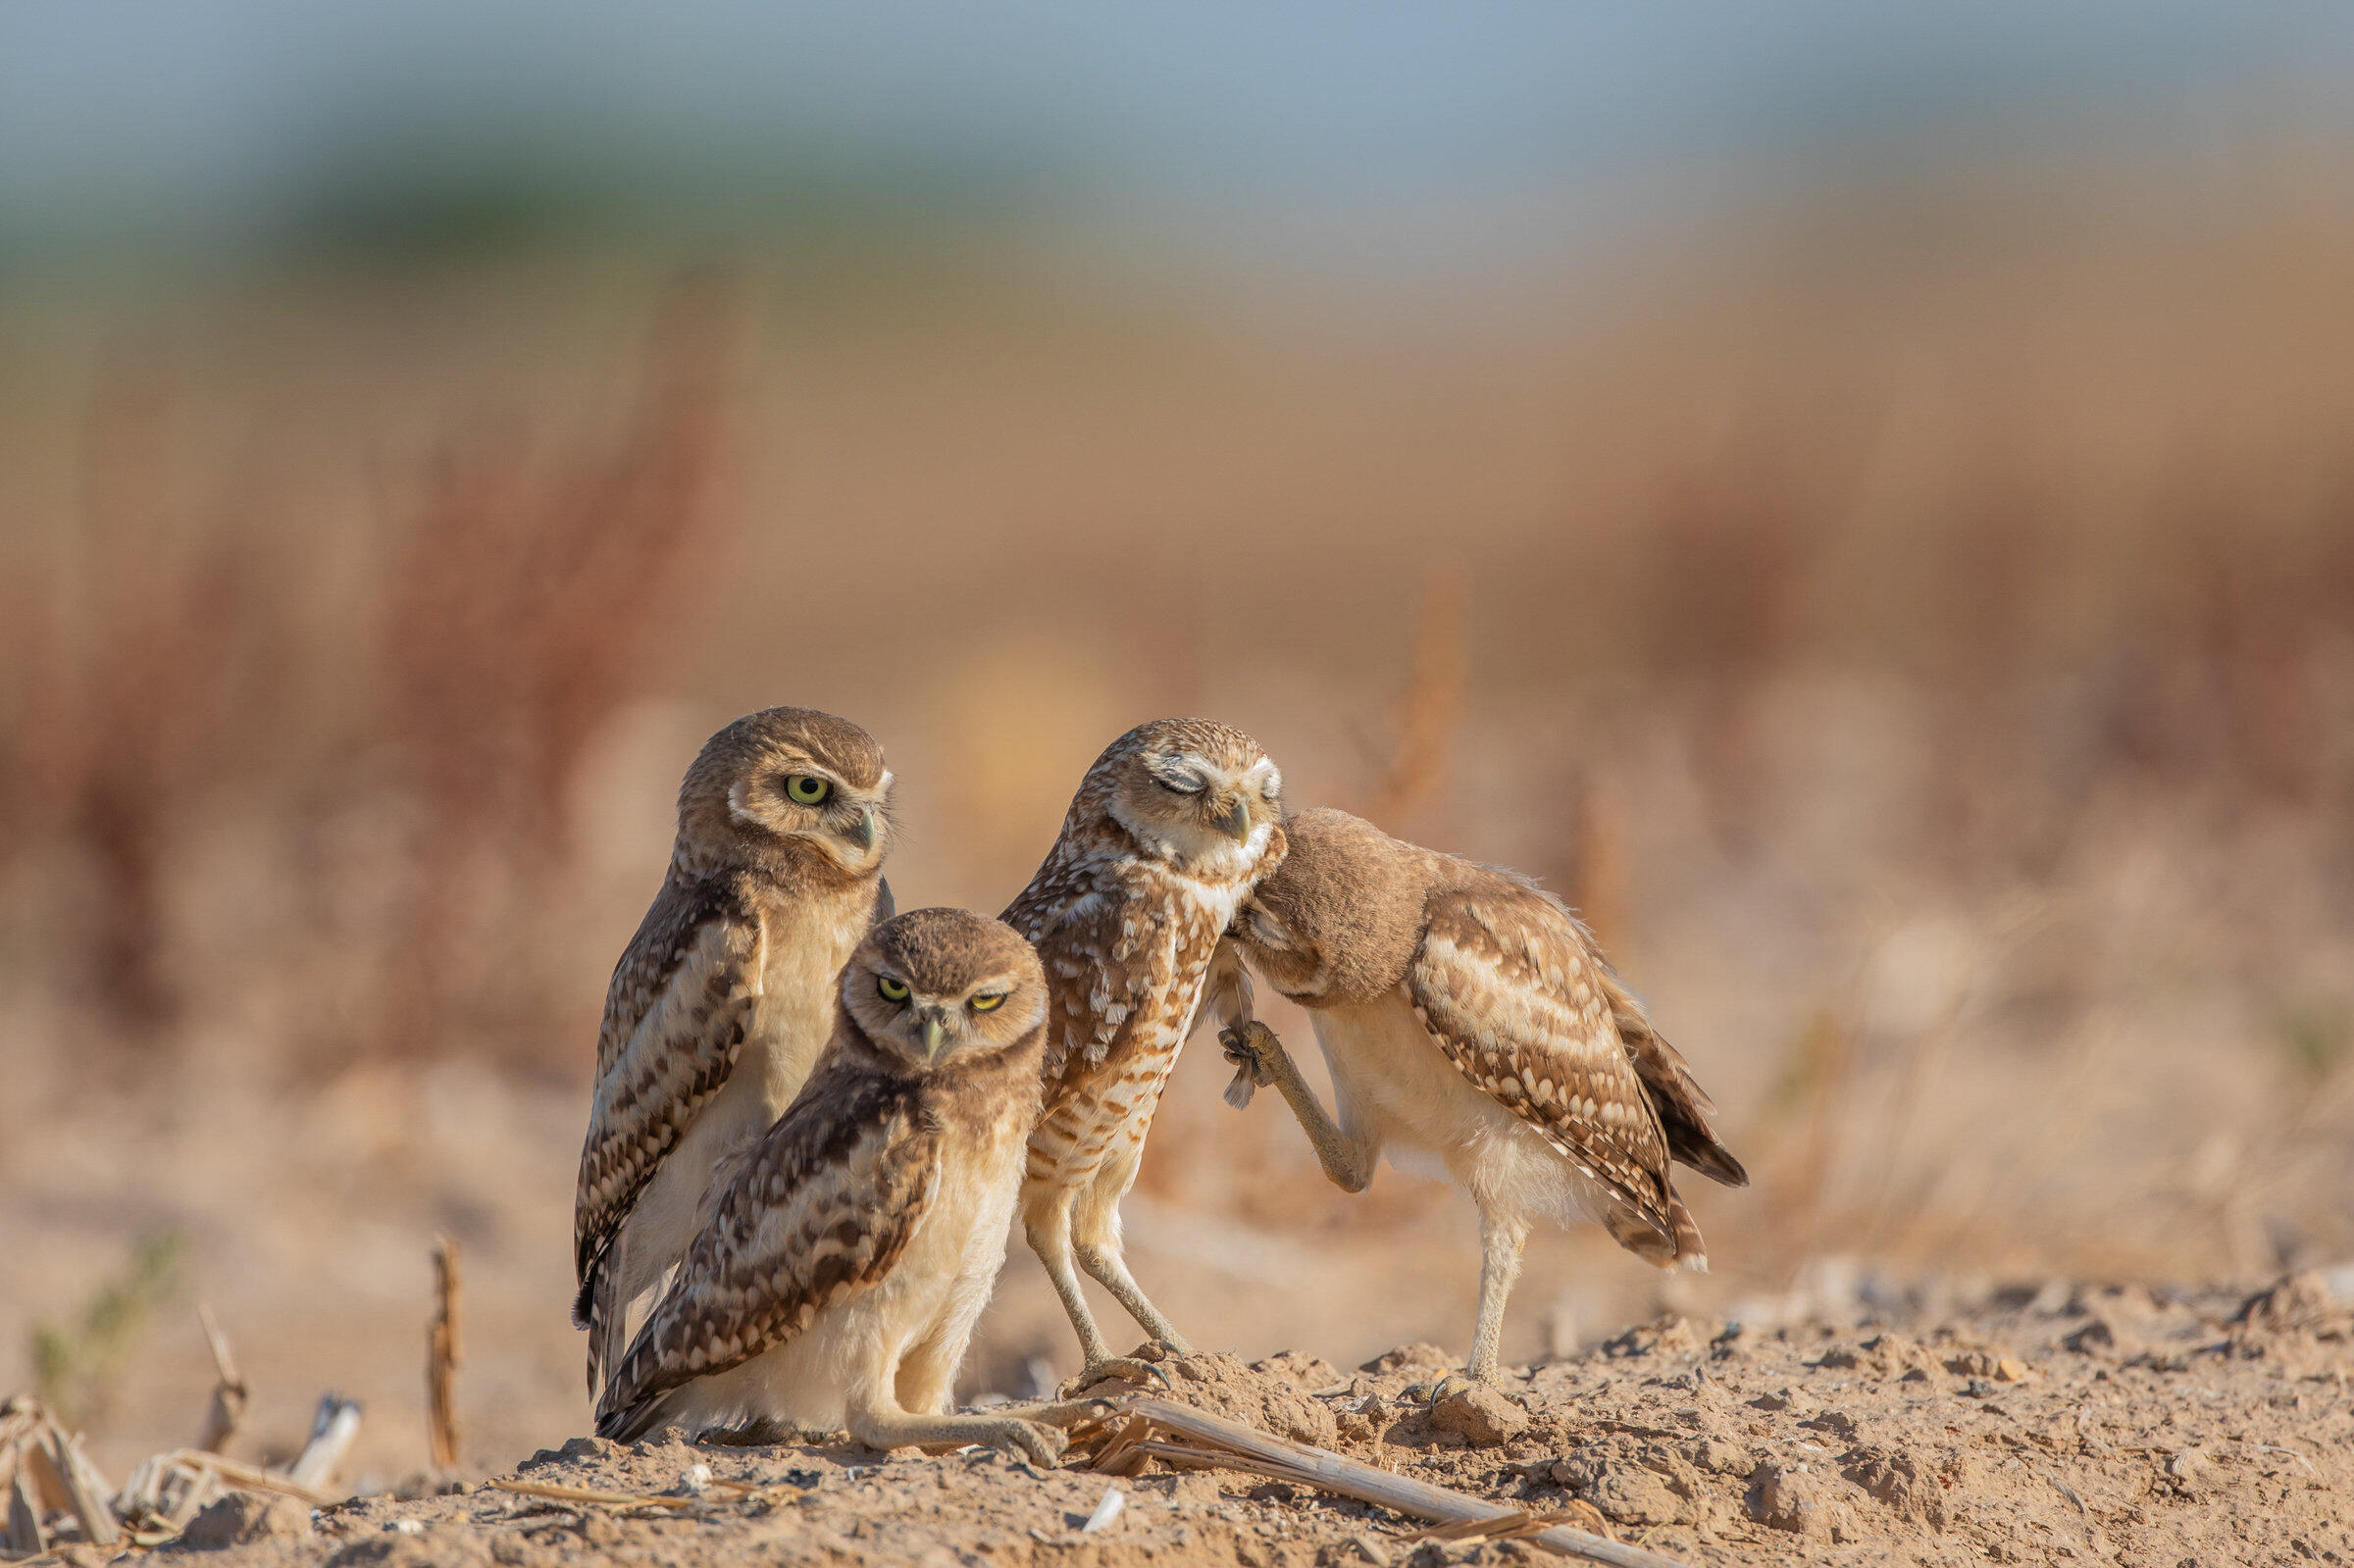 A group of burrowing owls huddles together in a field.